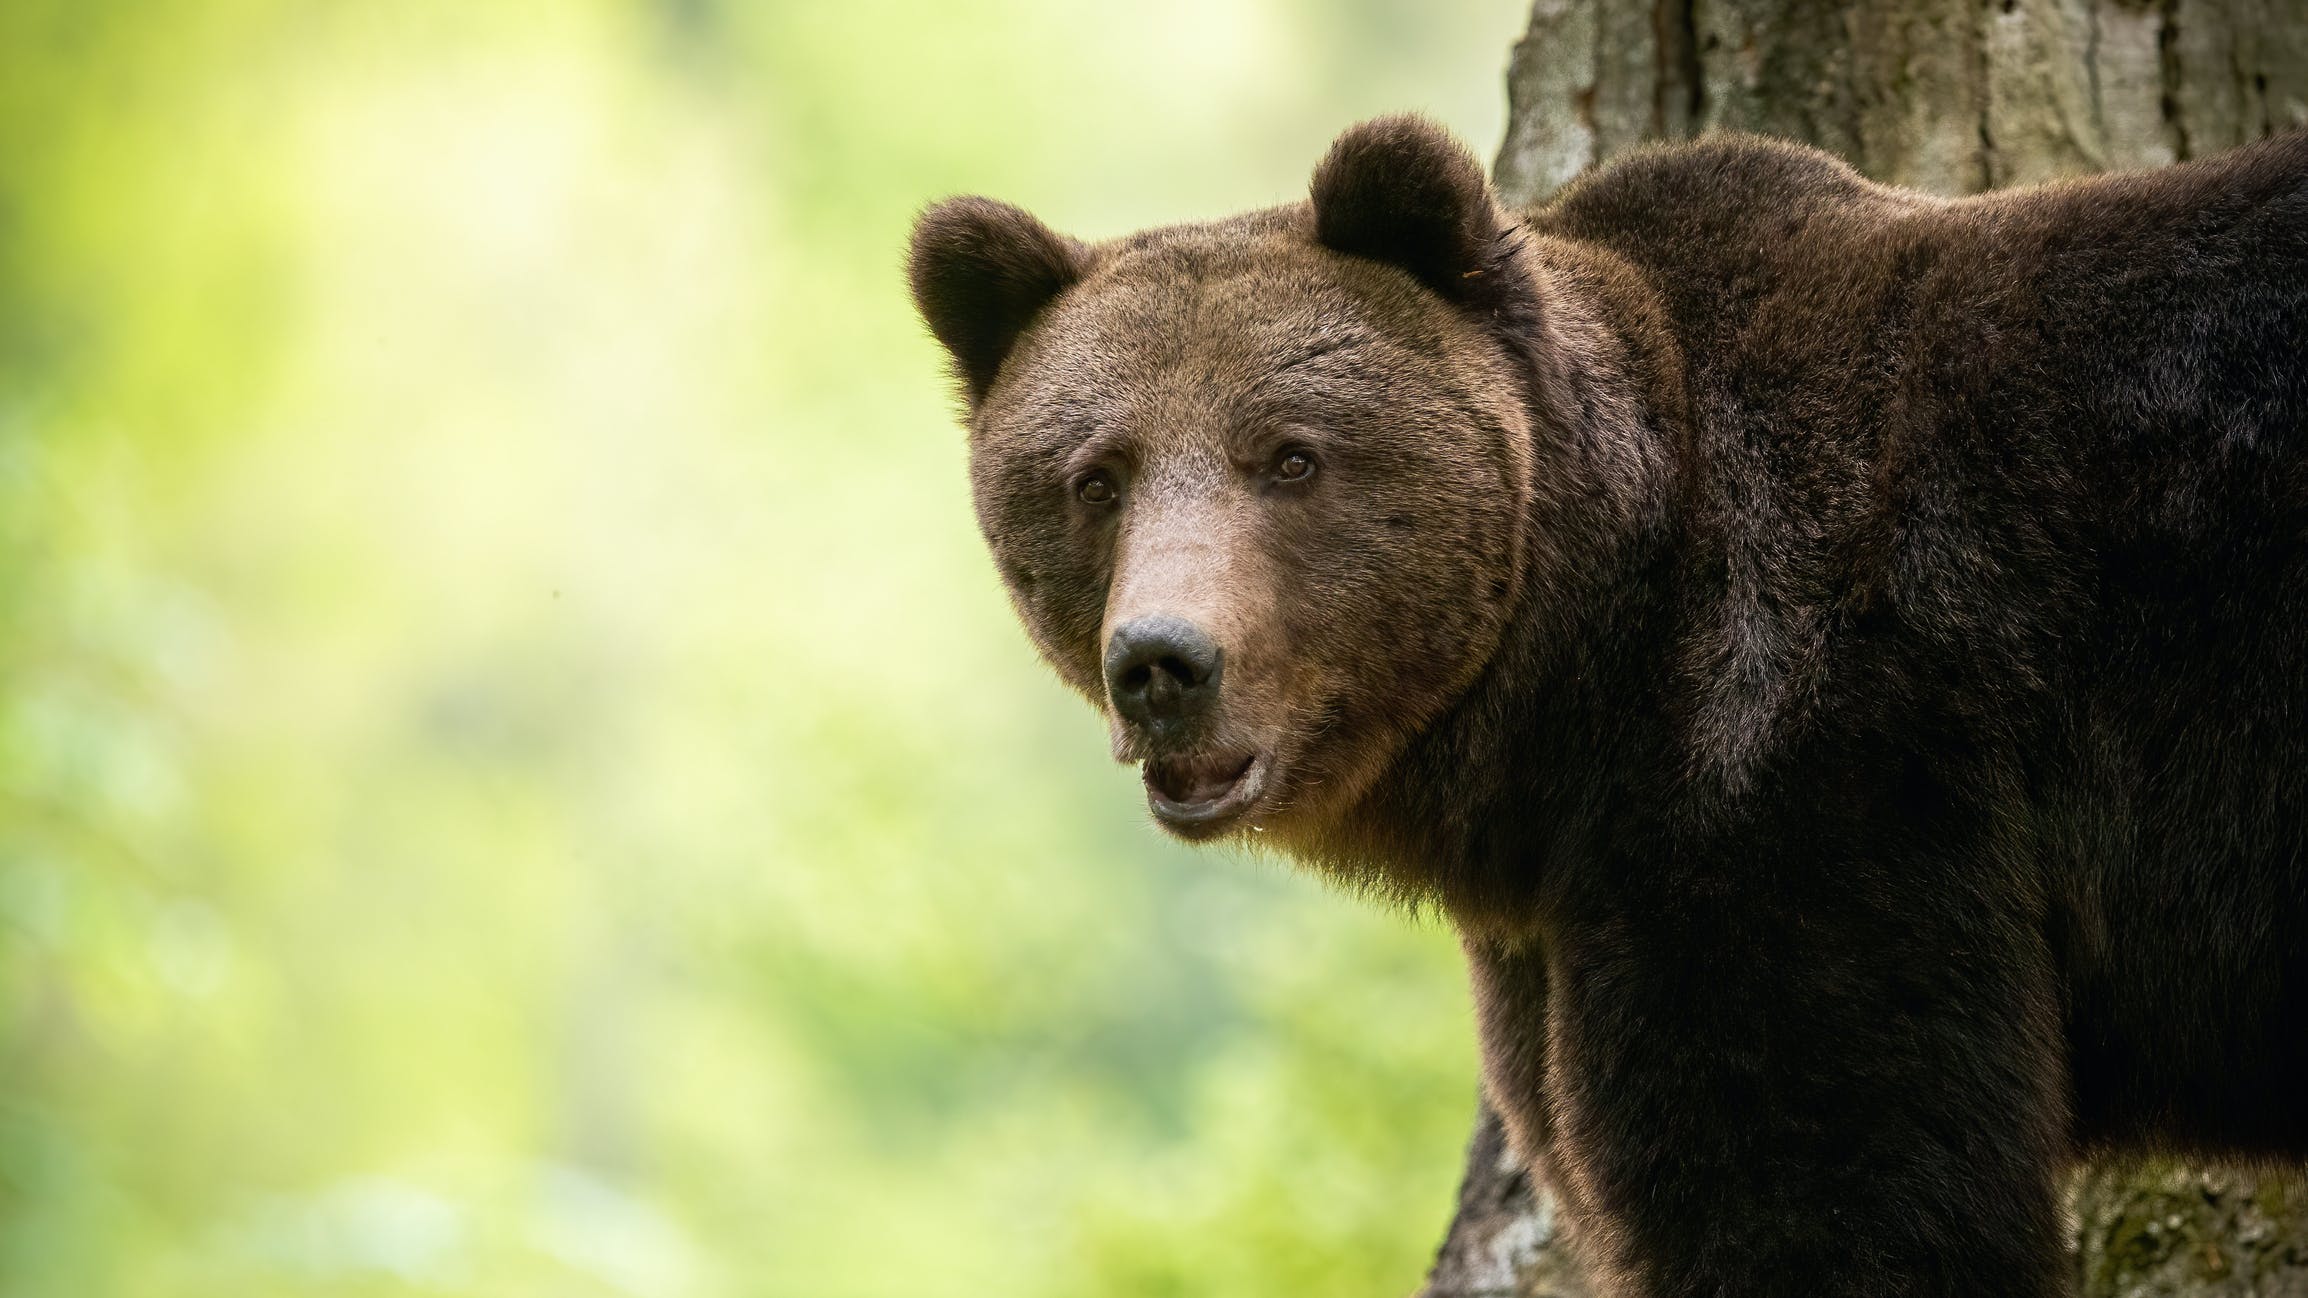 Much Better Adventures has launched a new collection of Rewilding Adventures designed to give budding Attenboroughs the opportunity to encounter rare wildlife in remote corners of Europe whilst supporting critical rewilding projects. 